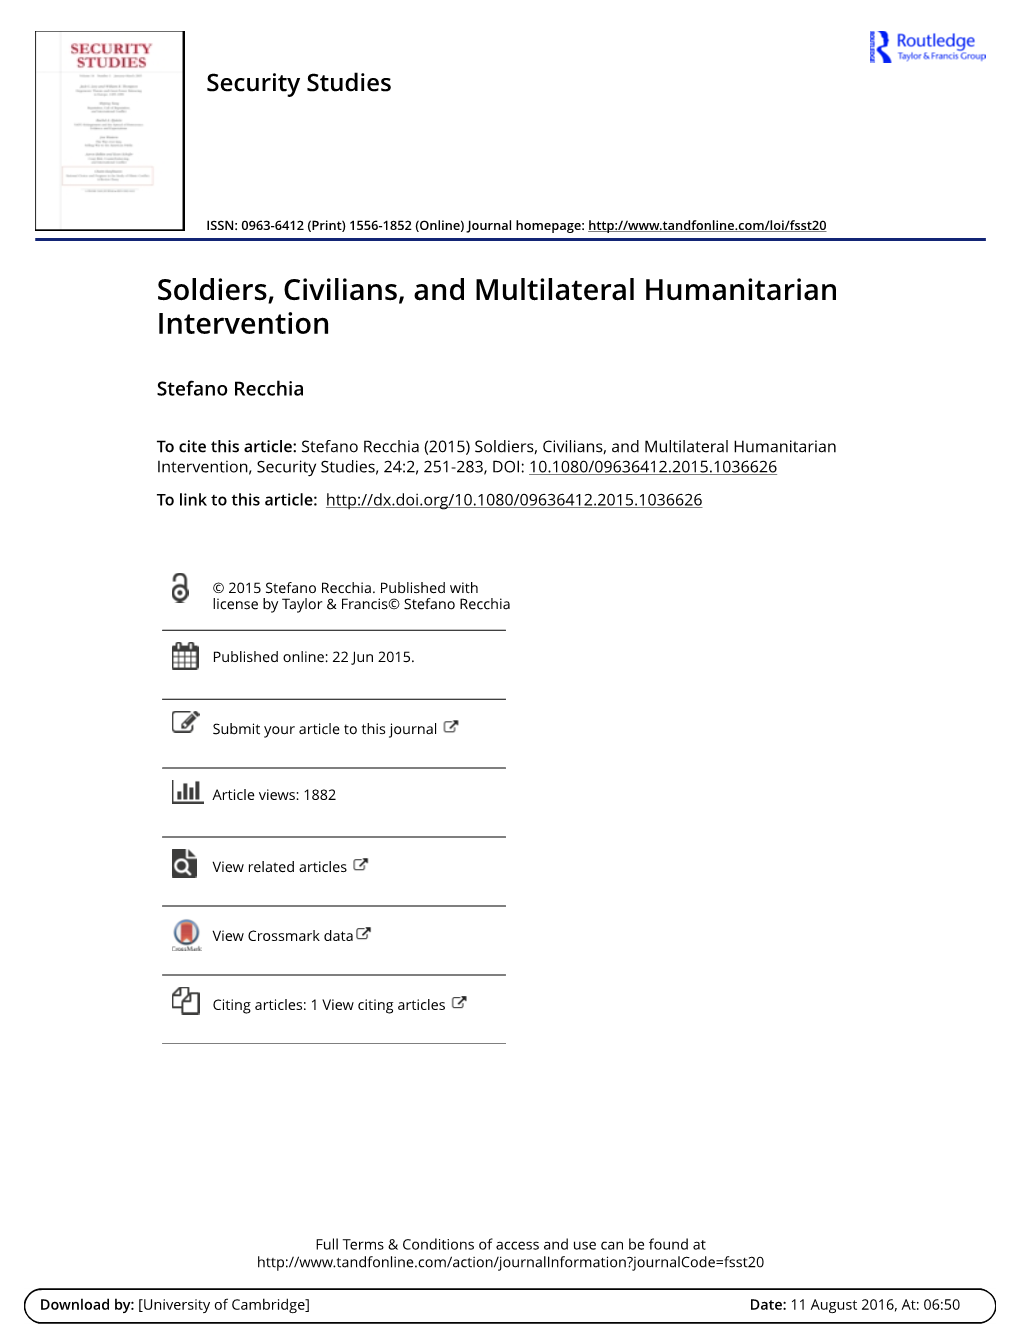 Soldiers, Civilians, and Multilateral Humanitarian Intervention